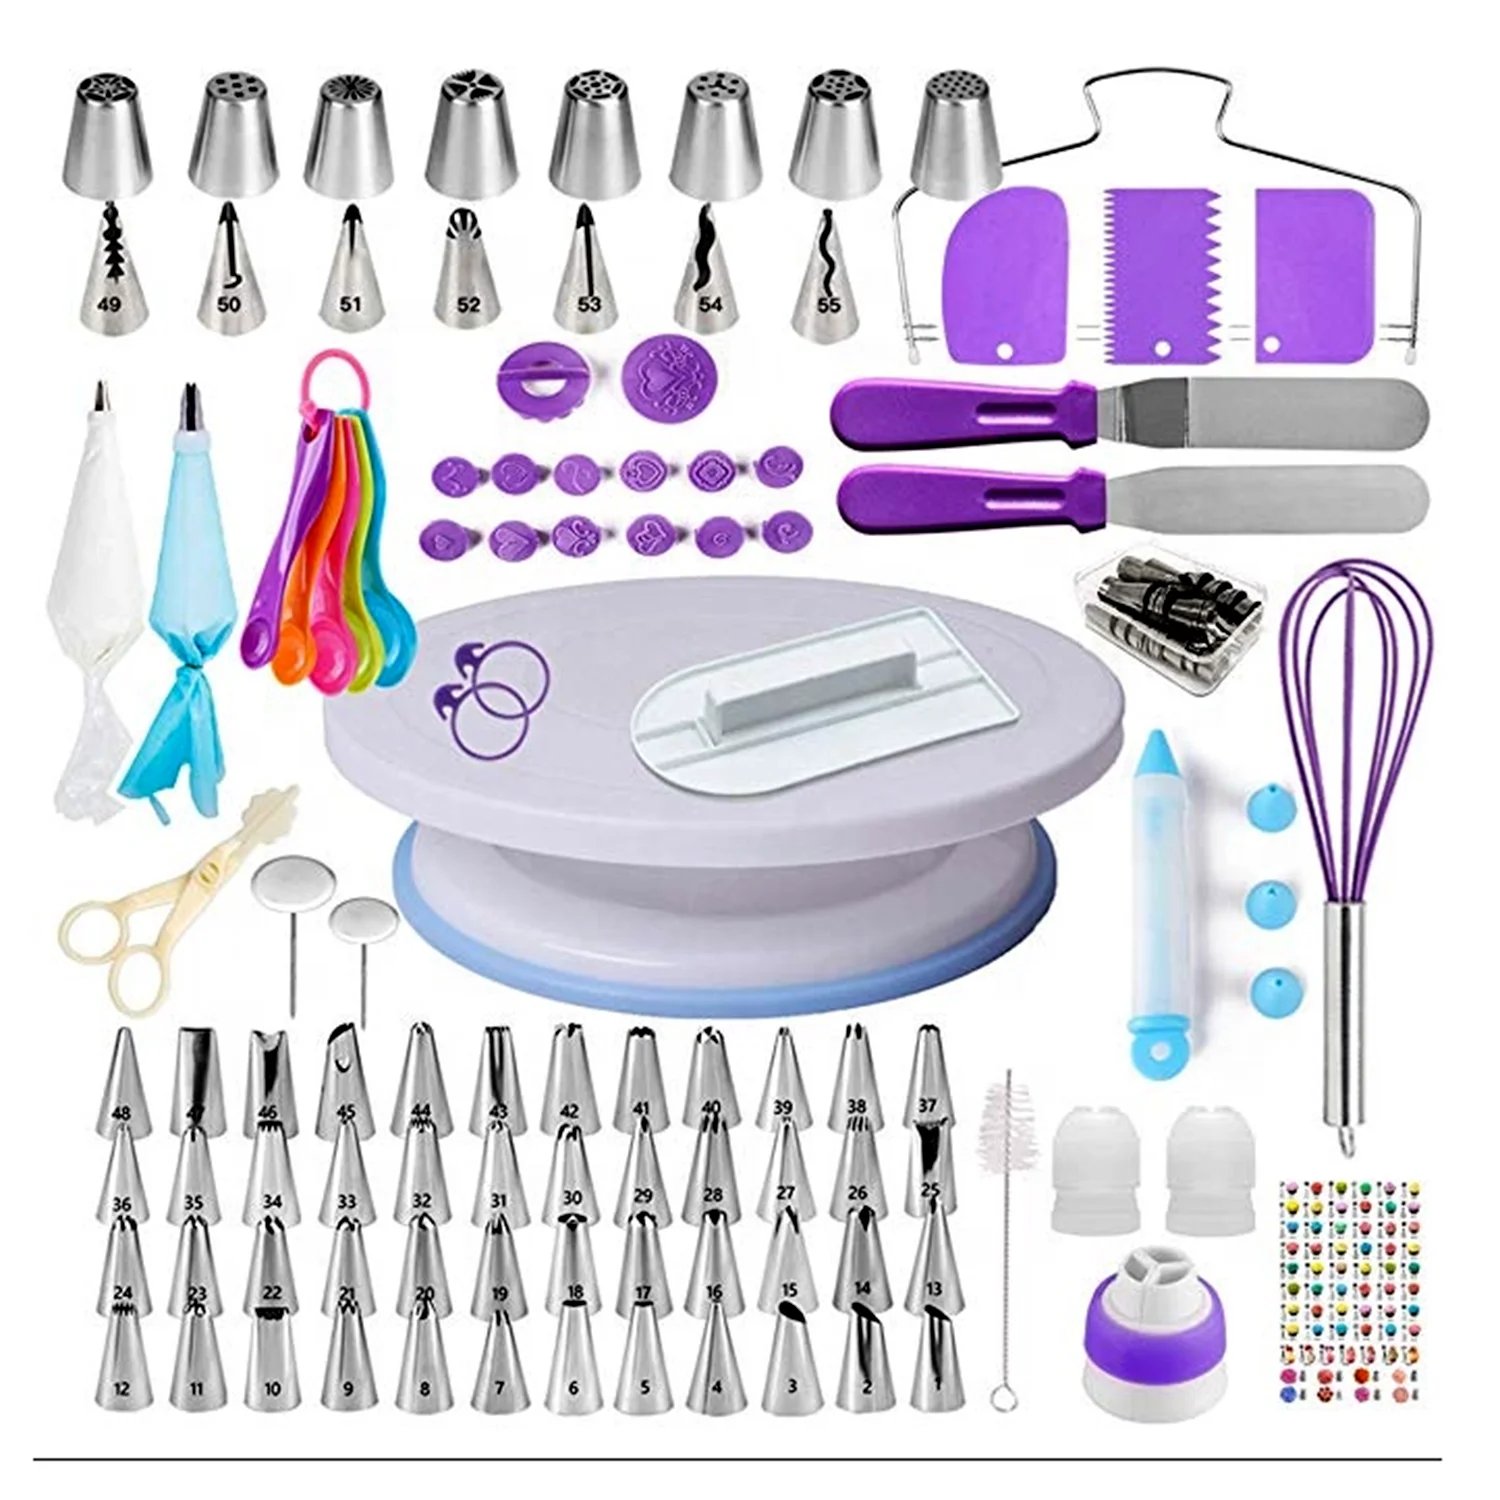 

137 PCS Russian Cake Decorating Supplies Kit Baking Pastry Tools Baking Accessories Cake Tools turntable cake nozzle piping bags